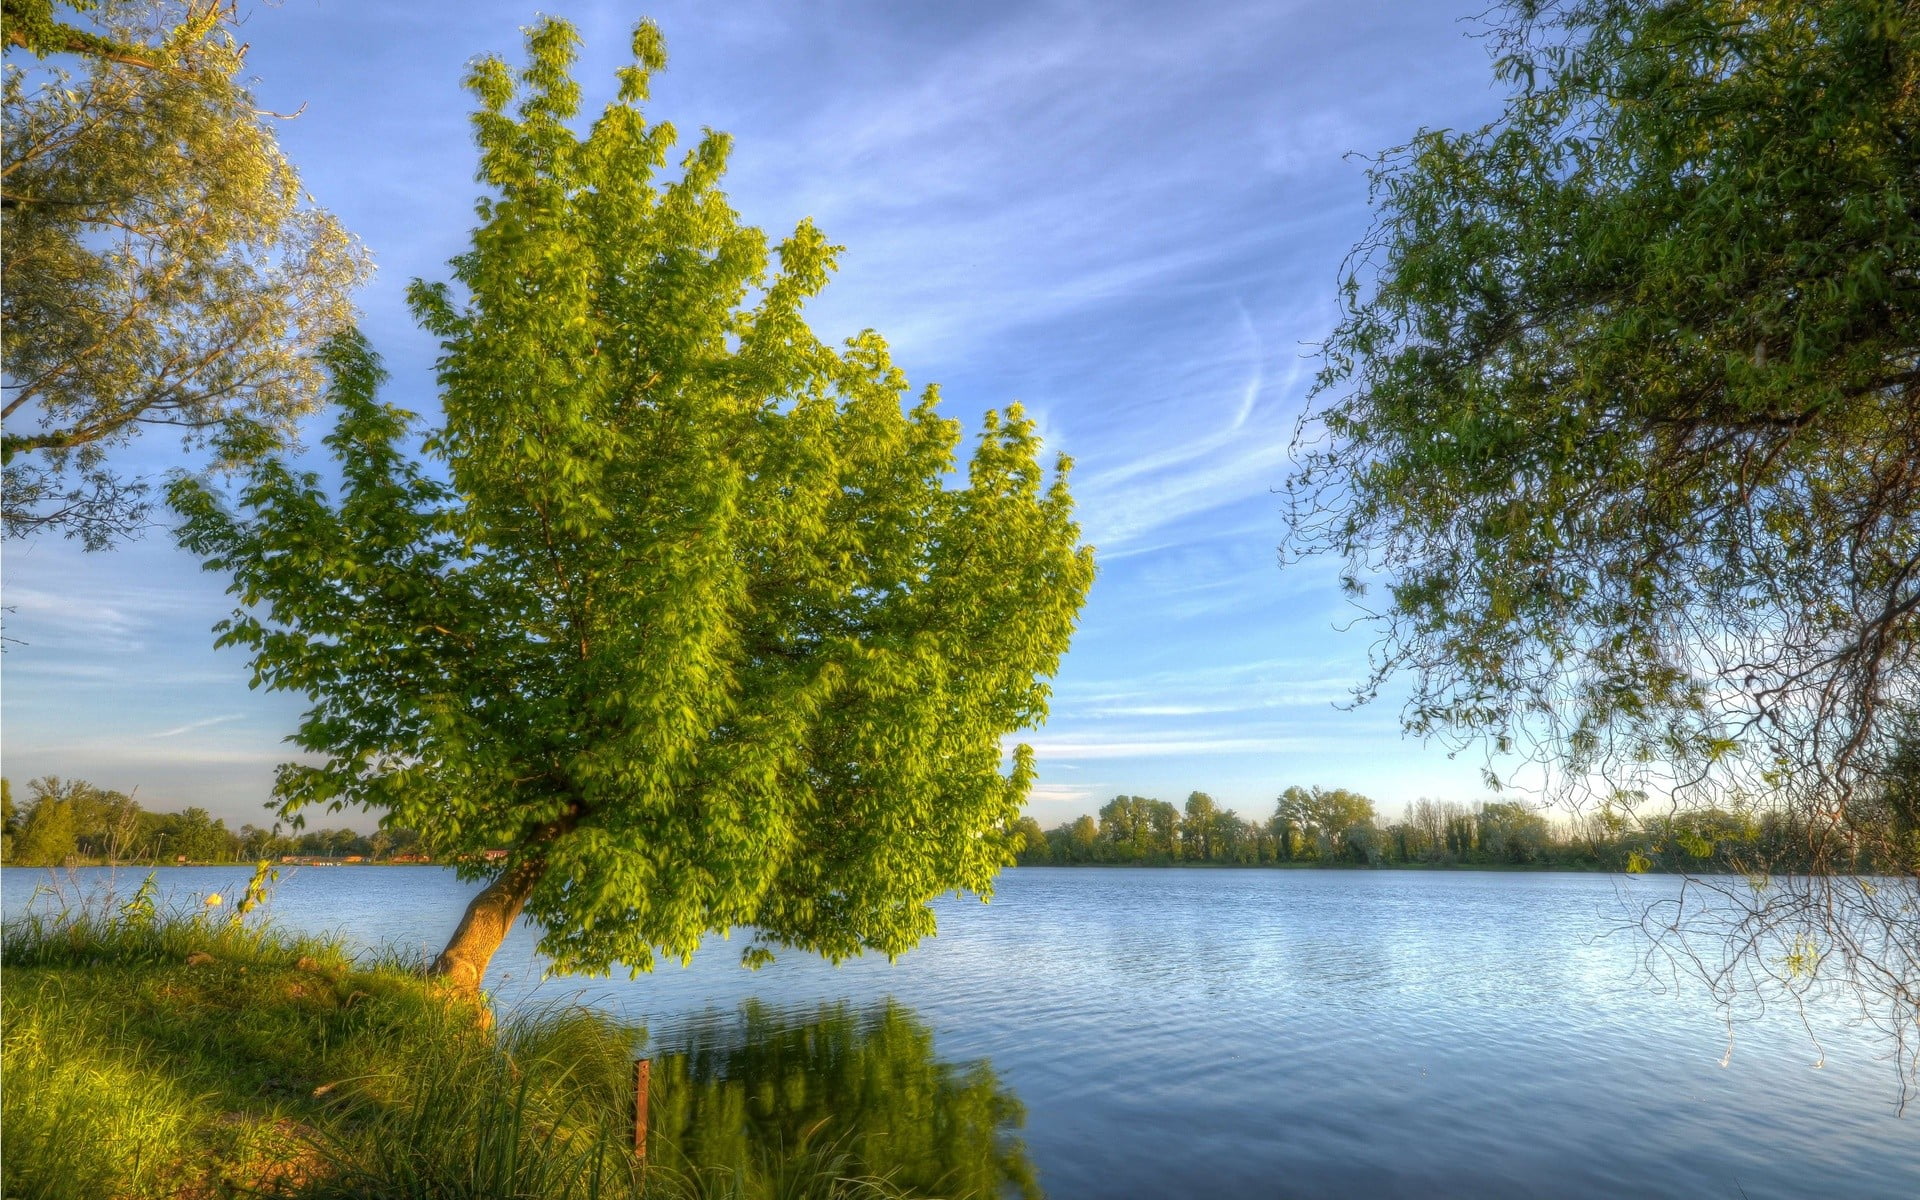 Online crop | green trees near body of water painting, nature ...